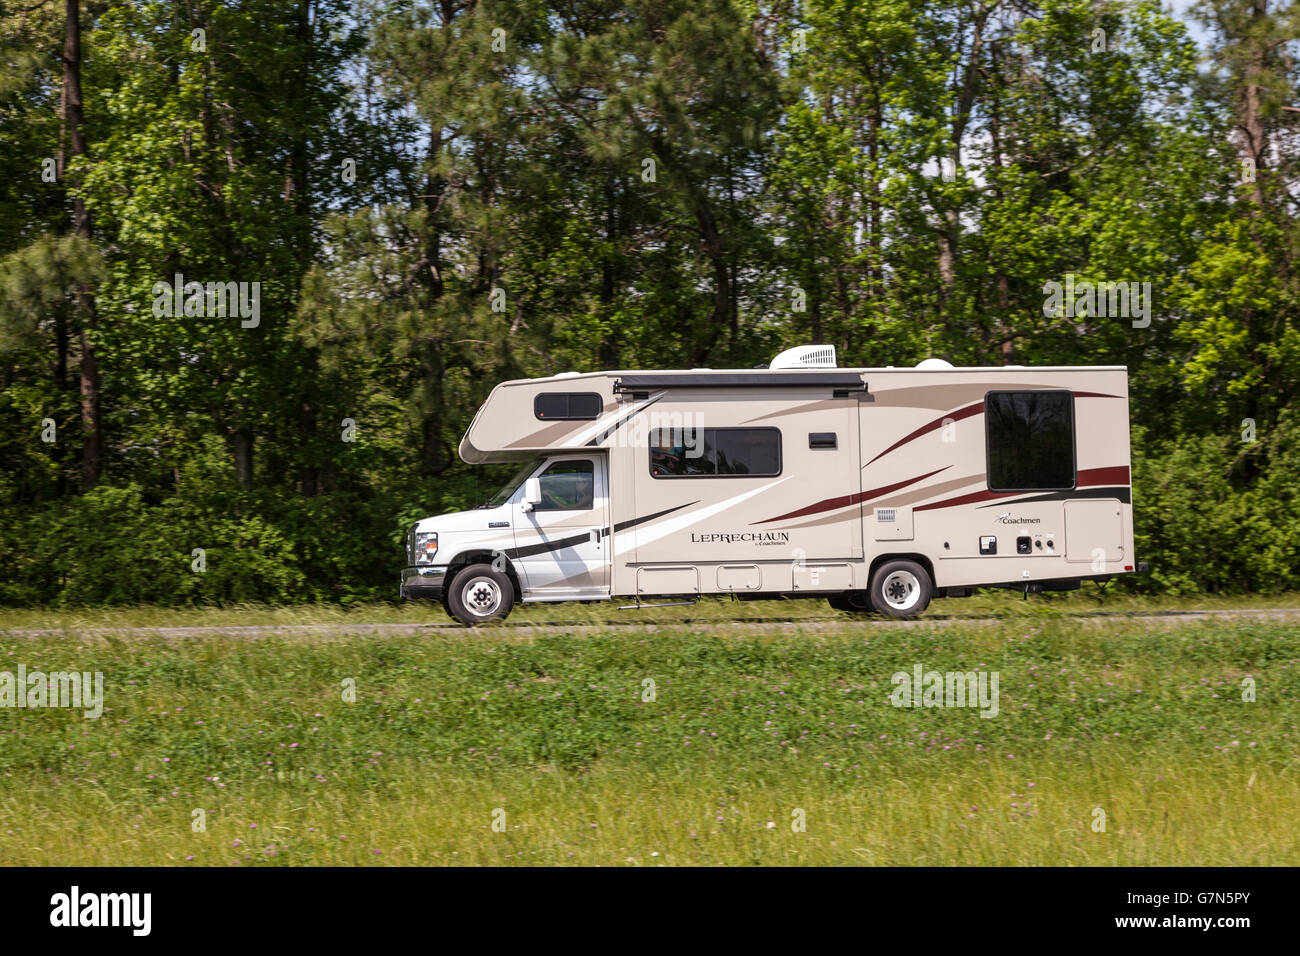 Recreational Vehicle on the Road Stock Photo